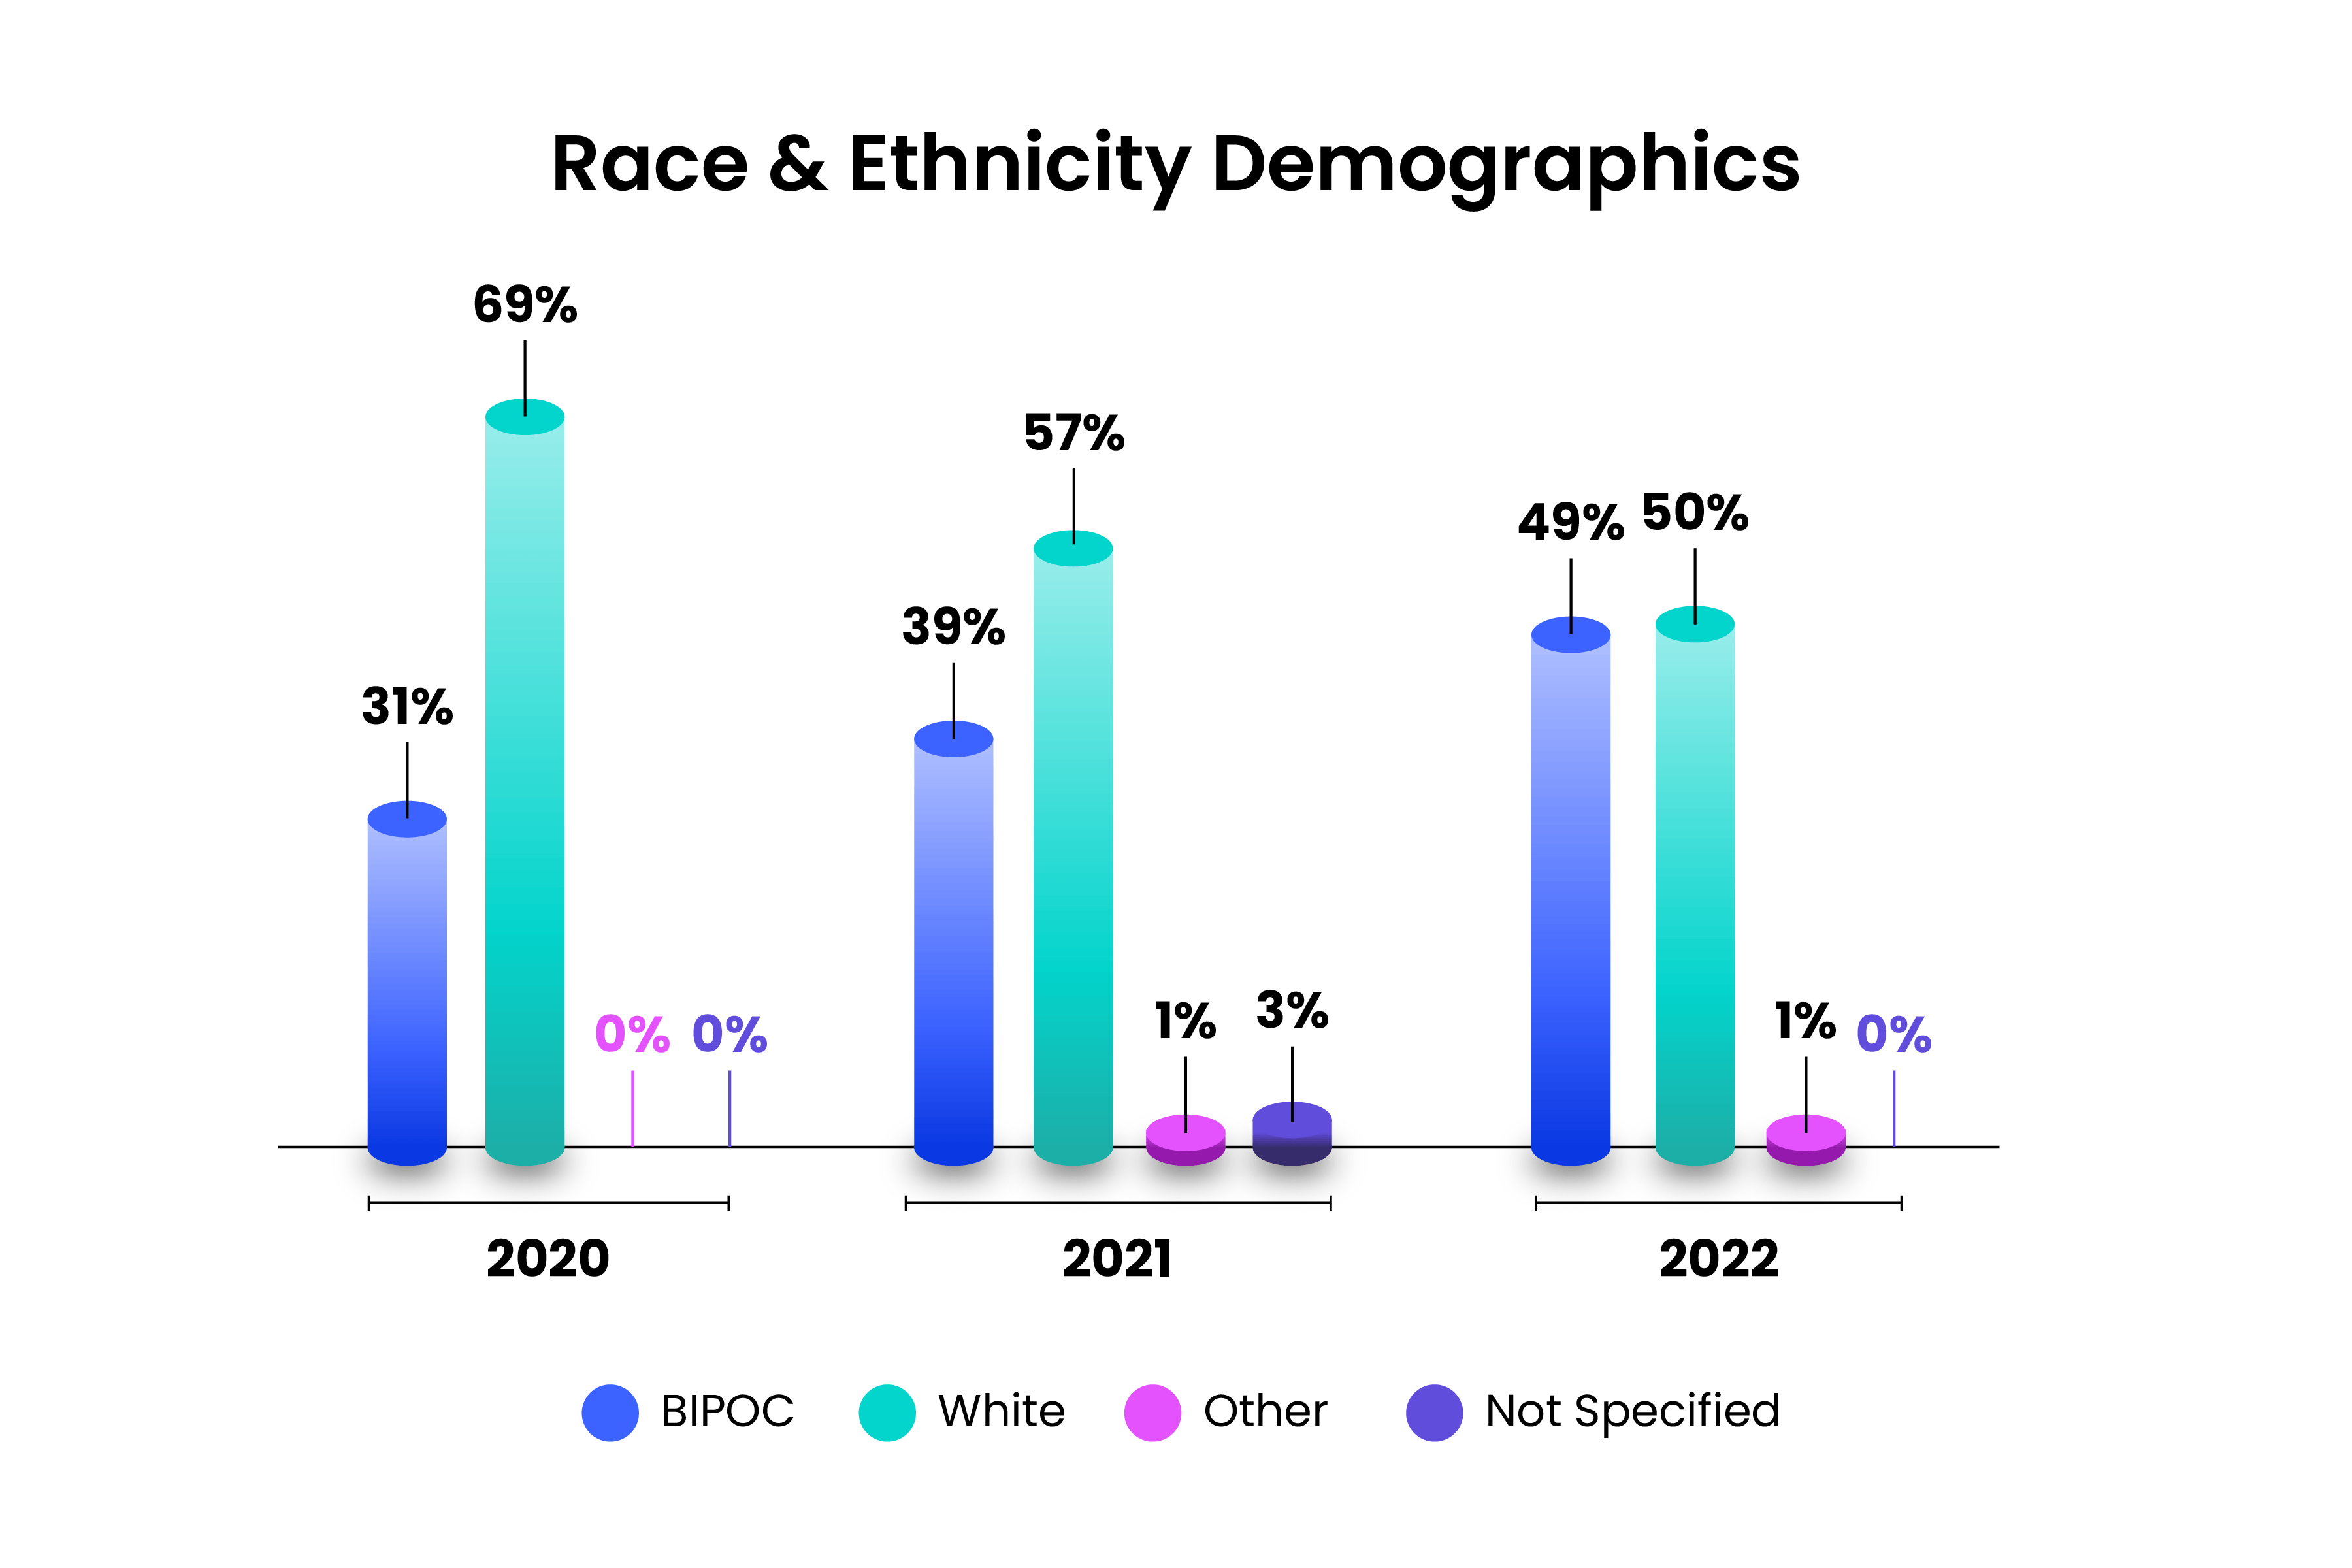 Racial and Ethnic Identity 2022: BIPOC 48.9%, White 50.4%, Other 0.7%